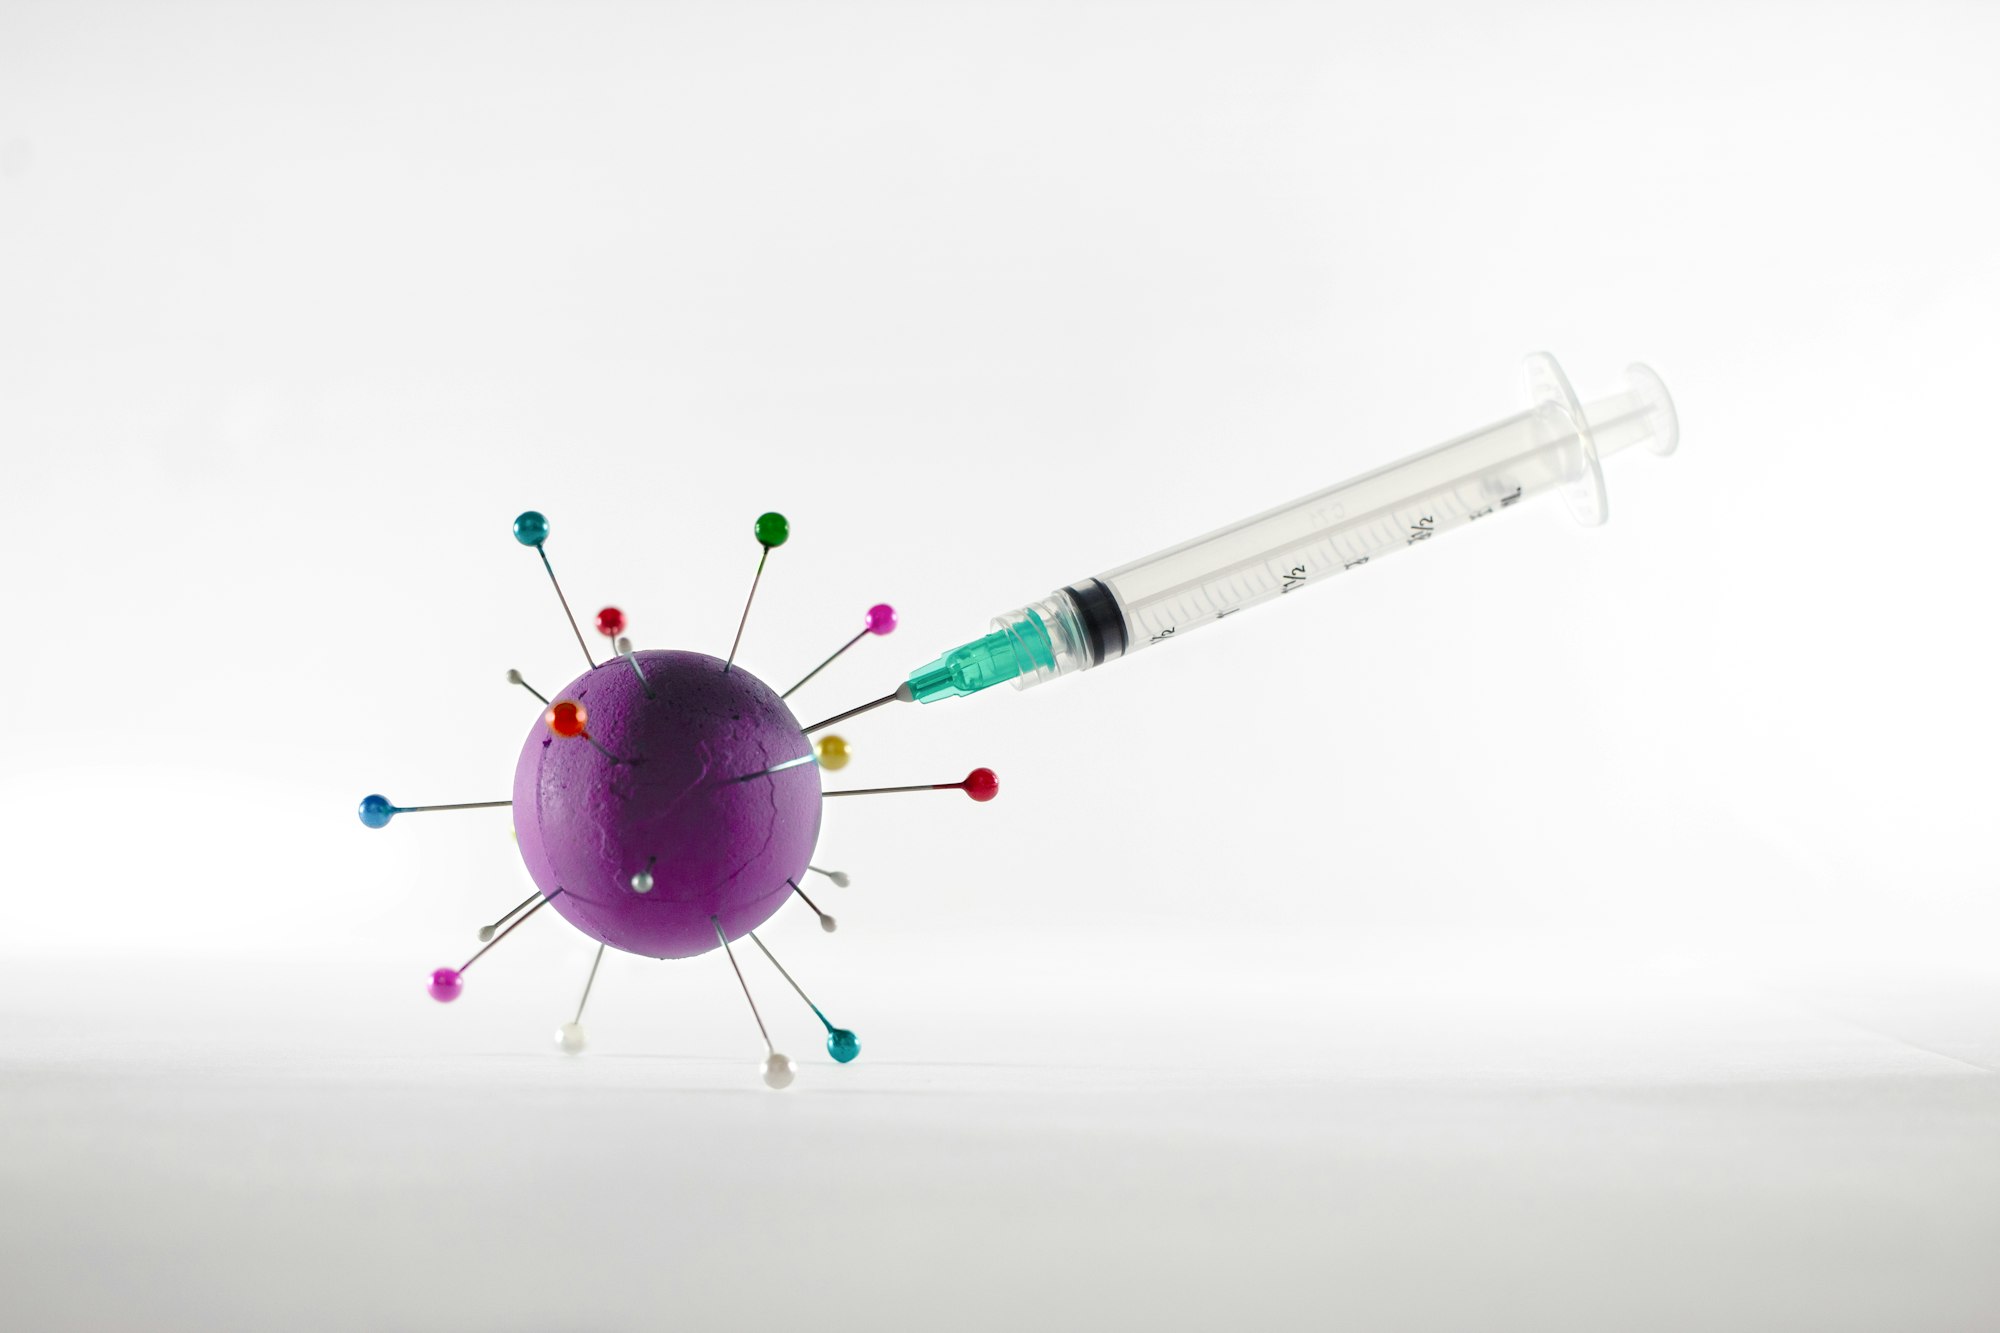 Analysis of Ten Promising Vaccine Candidates to Tackle SARS-CoV-2 with Patent Review